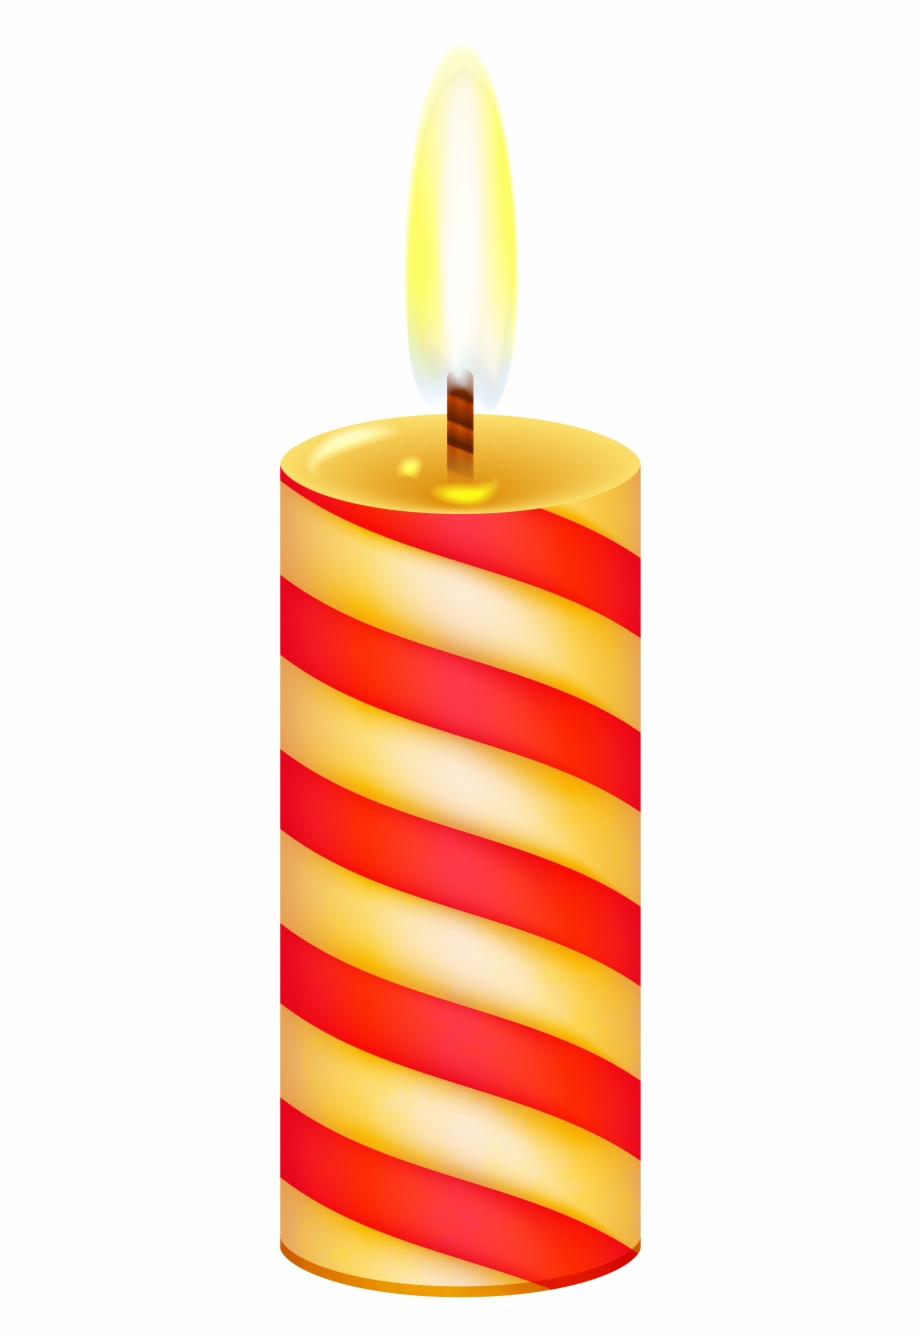 free-birthday-candle-transparent-download-free-birthday-candle